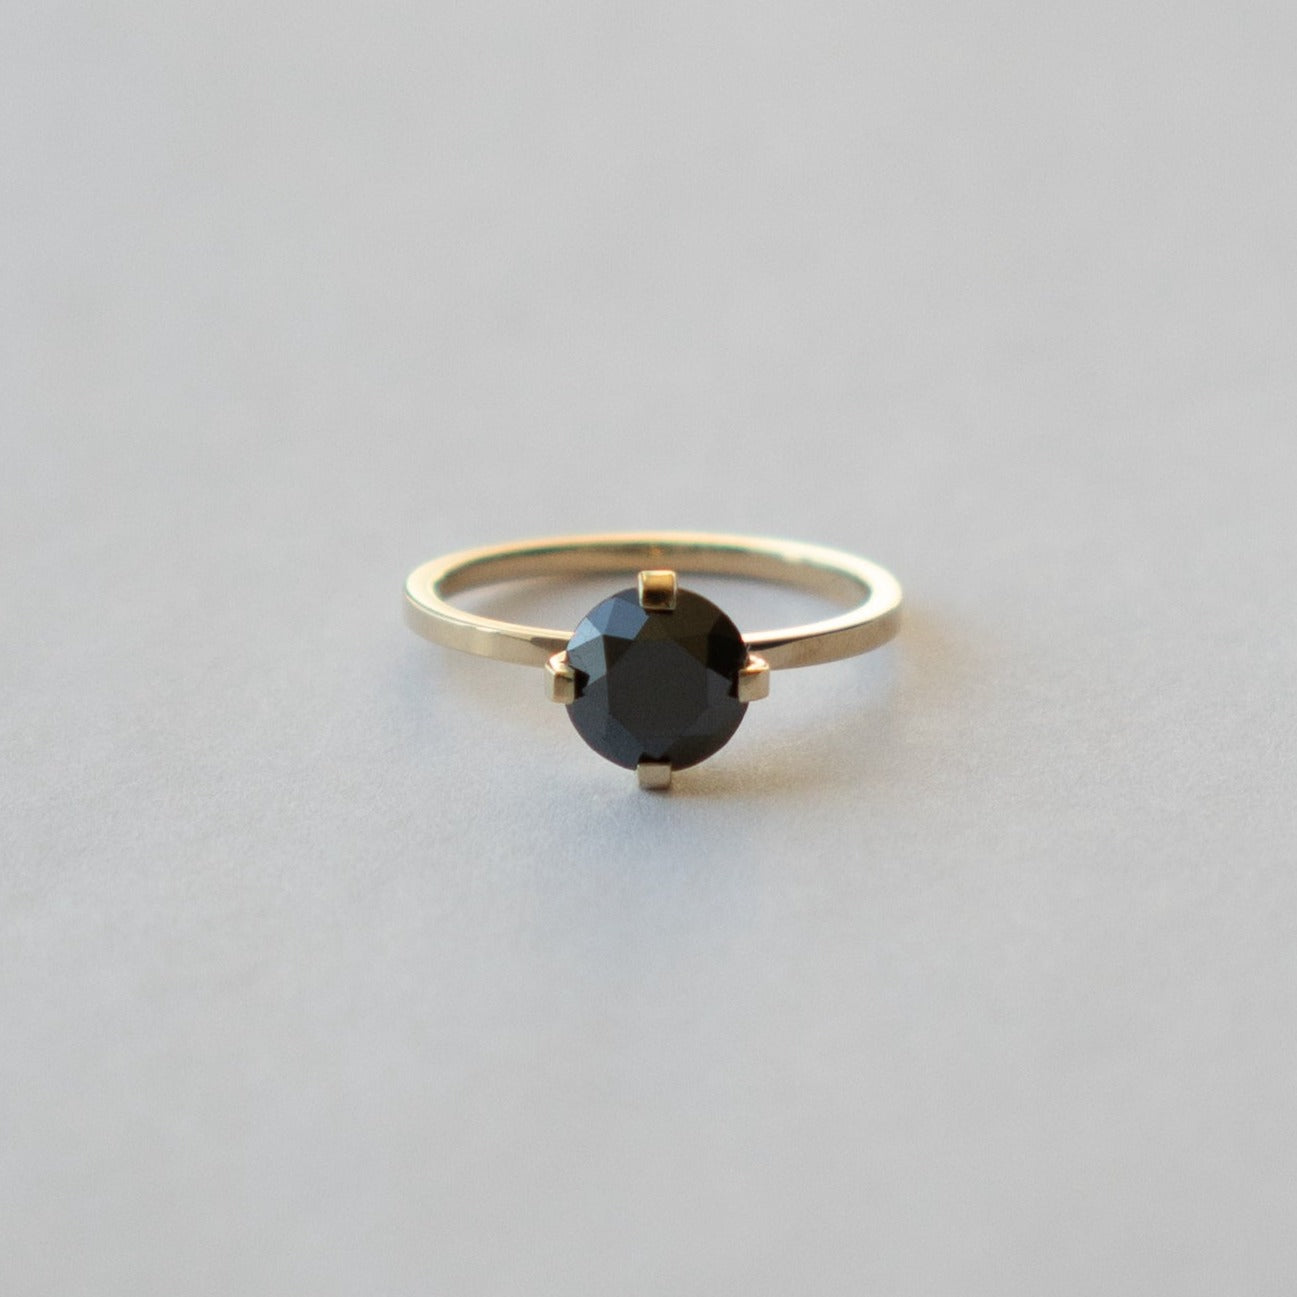 Vila Unique Ring in 14k gold set with a 1.65ct round brilliant cut black diamond by SHW Fine Jewelry NYC